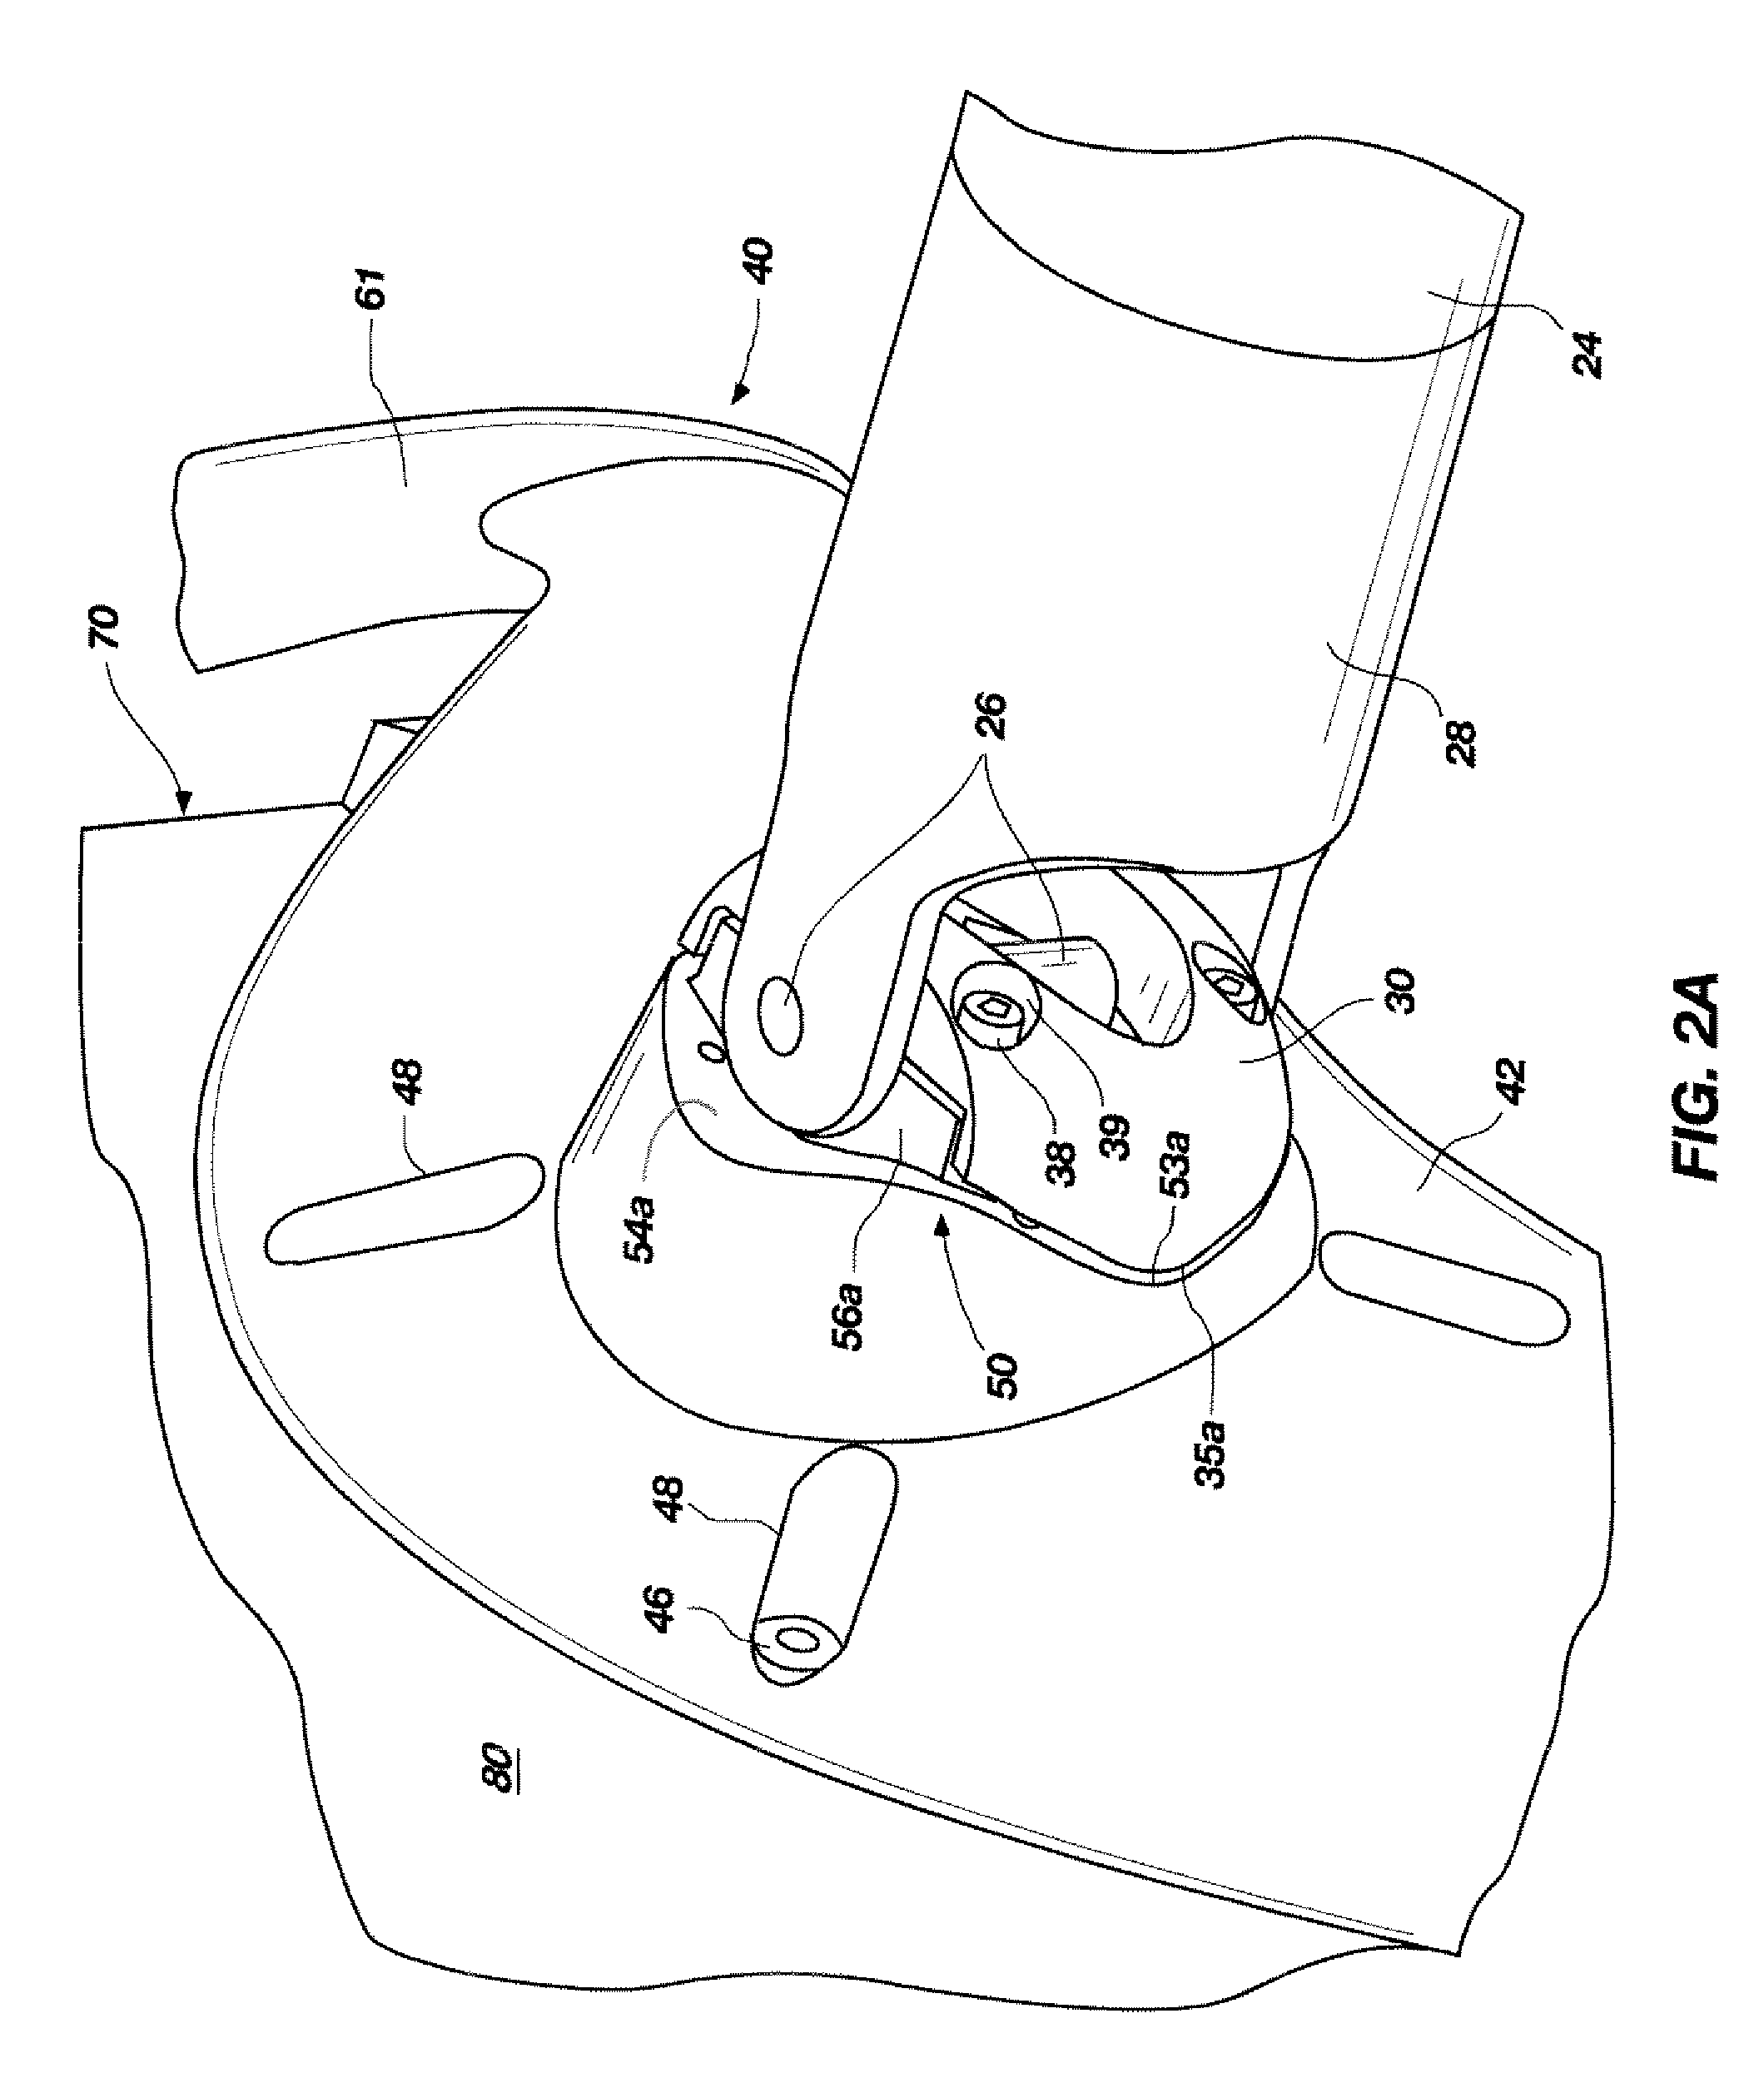 Support for assembly with flat panel video monitors, coupler for attachment of the support to an extension arm, and assembly methods